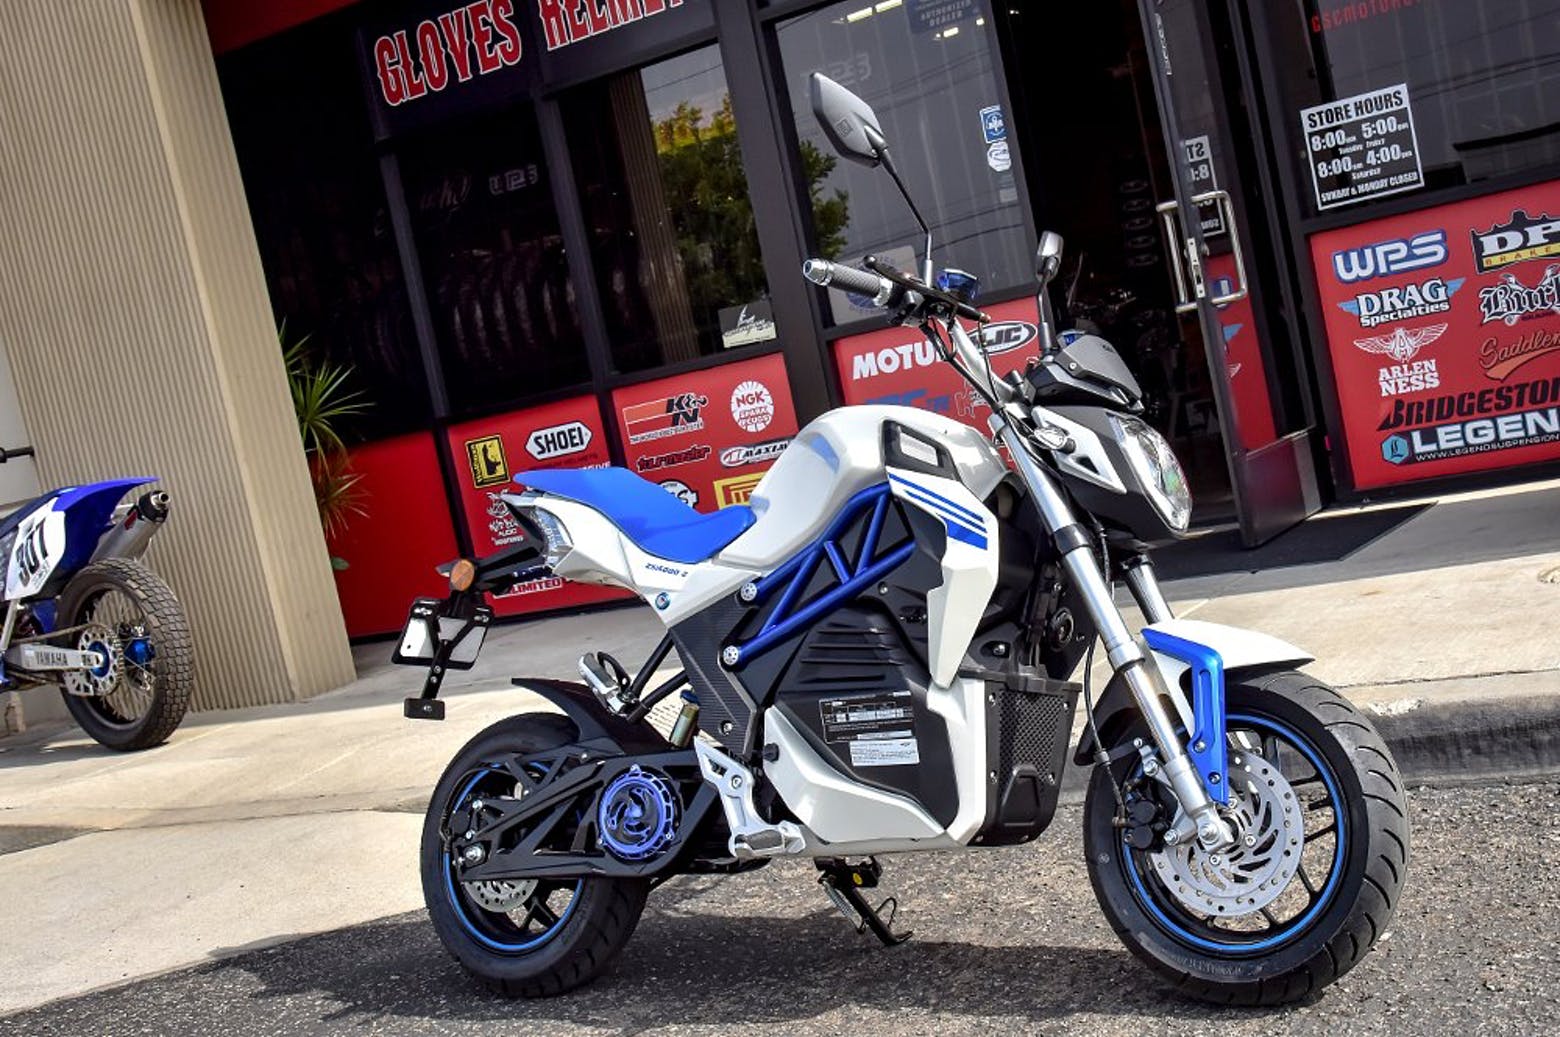 $2000 electric motorcycle